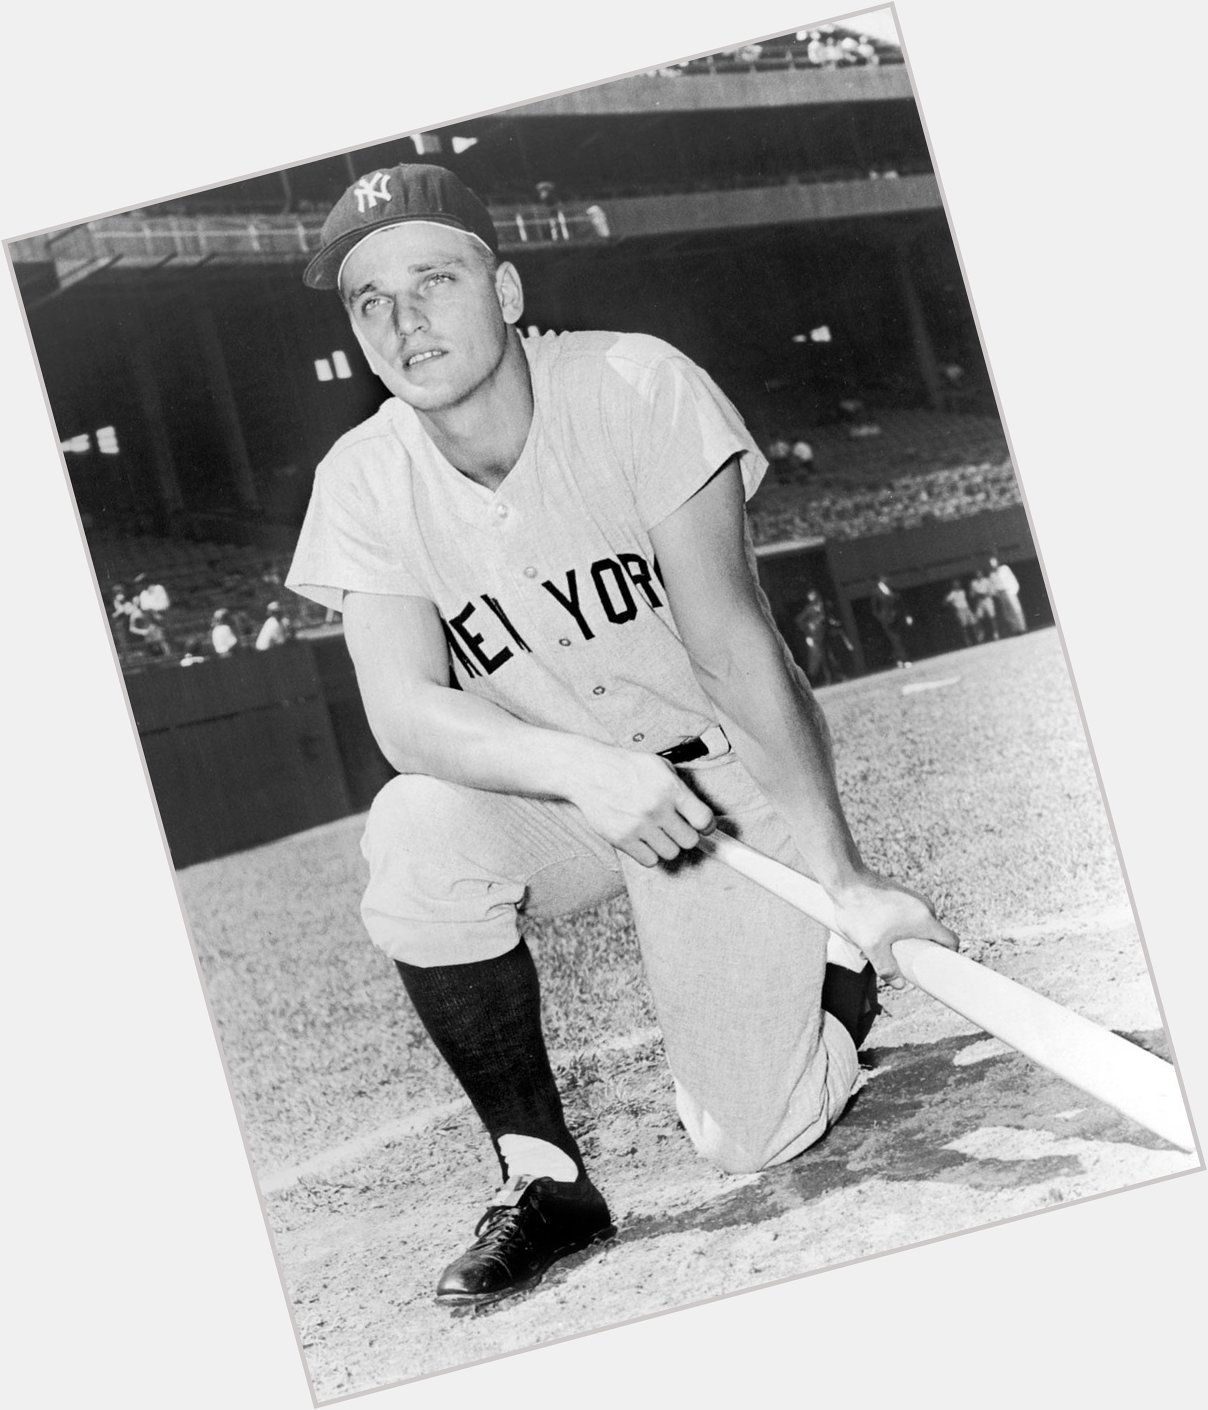 Happy birthday to Roger Maris, who would\ve turned 81 today. His record of 61 homers in a season lasted 37 years. 